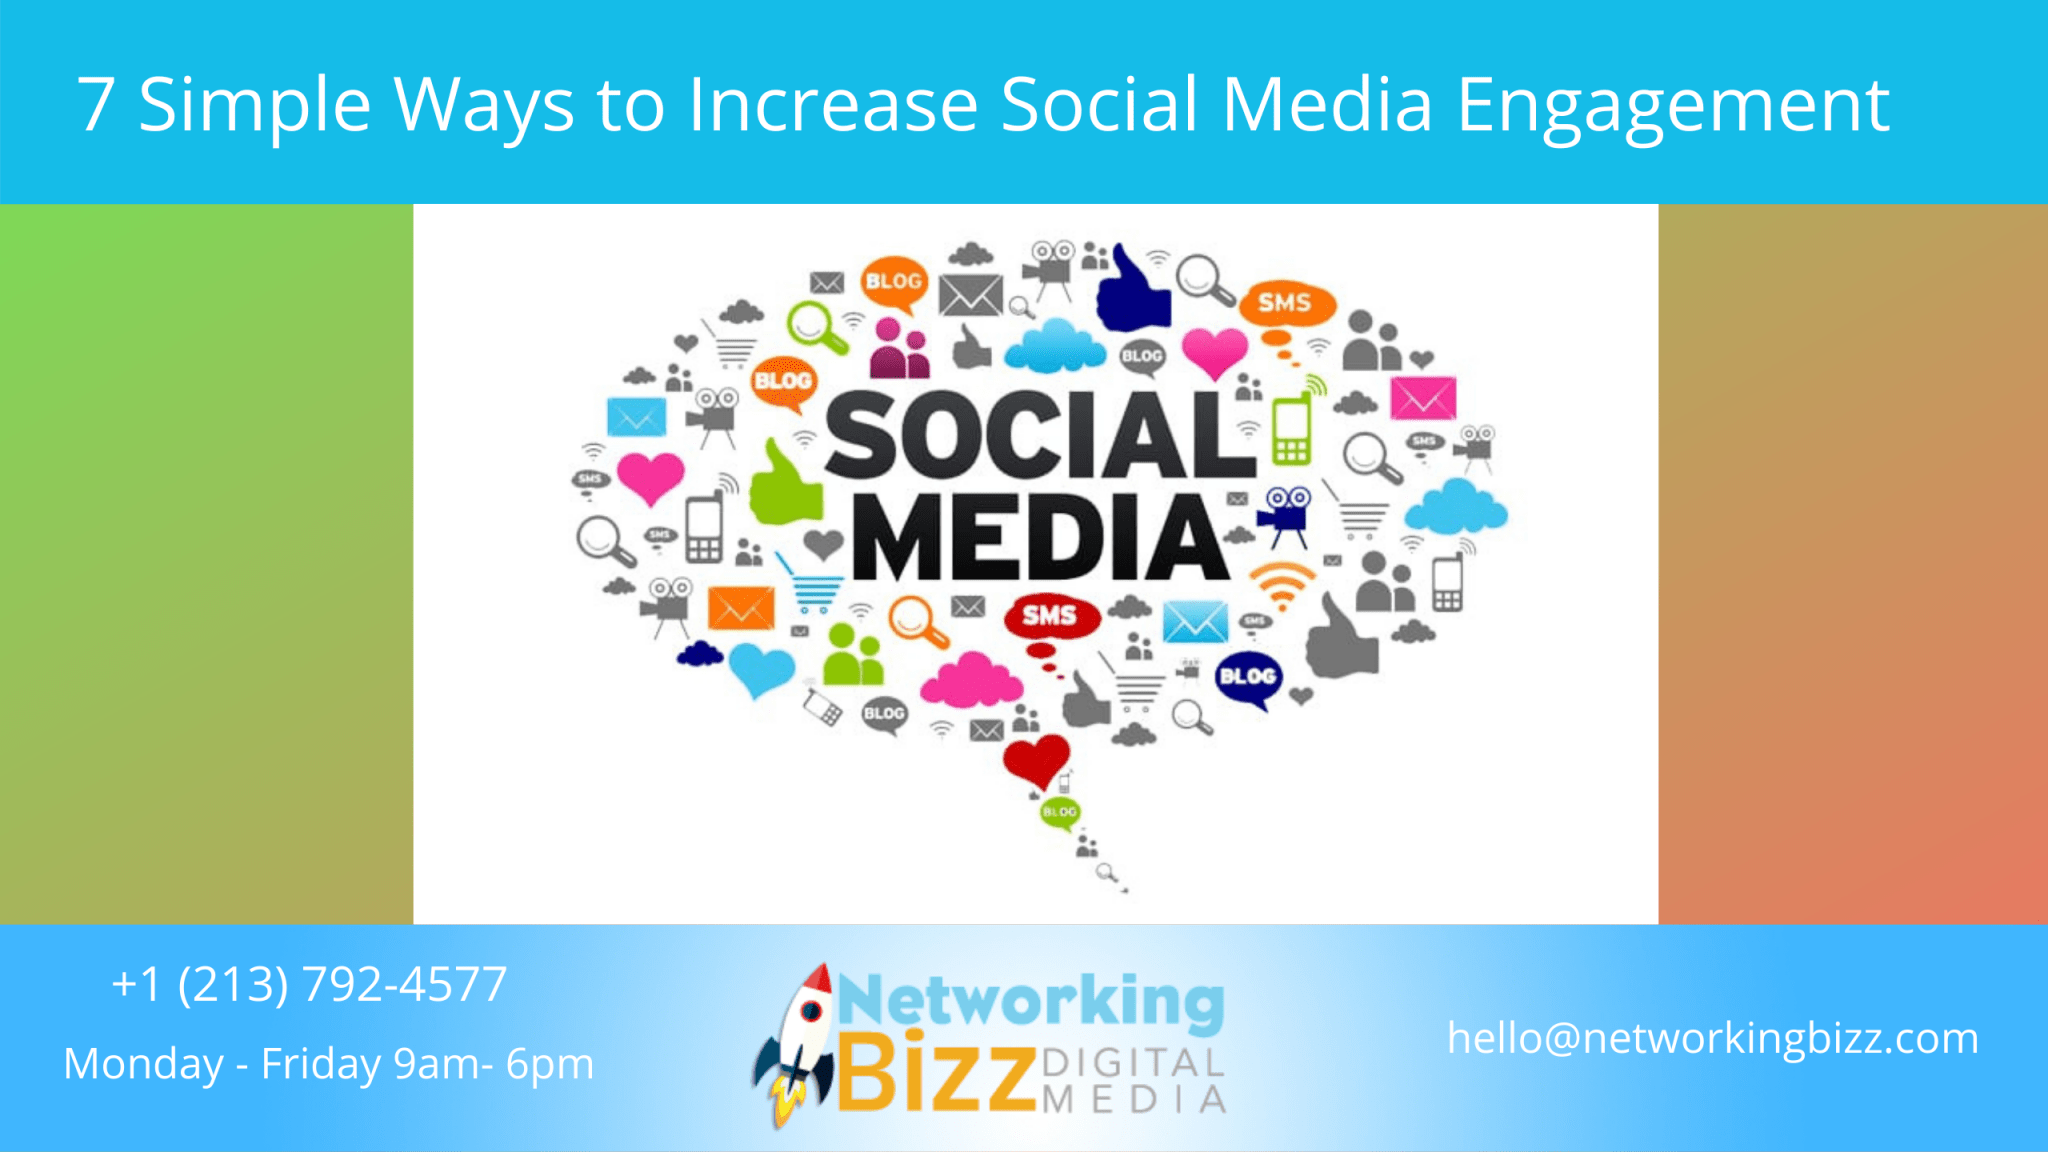 7 Simple Ways to Increase Social Media Engagement